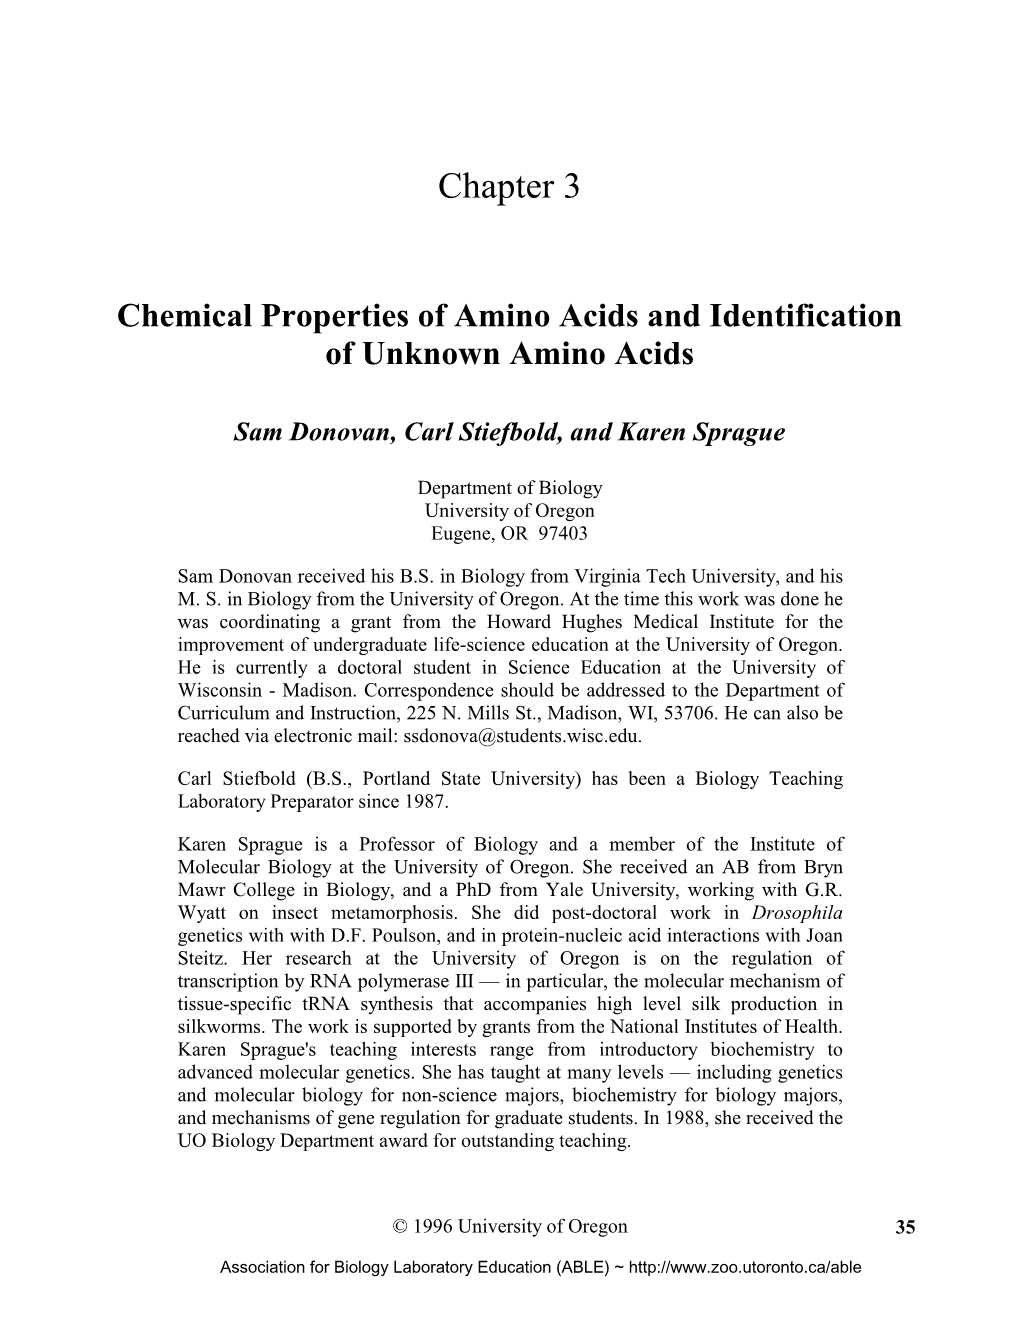 Chemical Properties of Amino Acids and Identification of Unknown Amino Acids